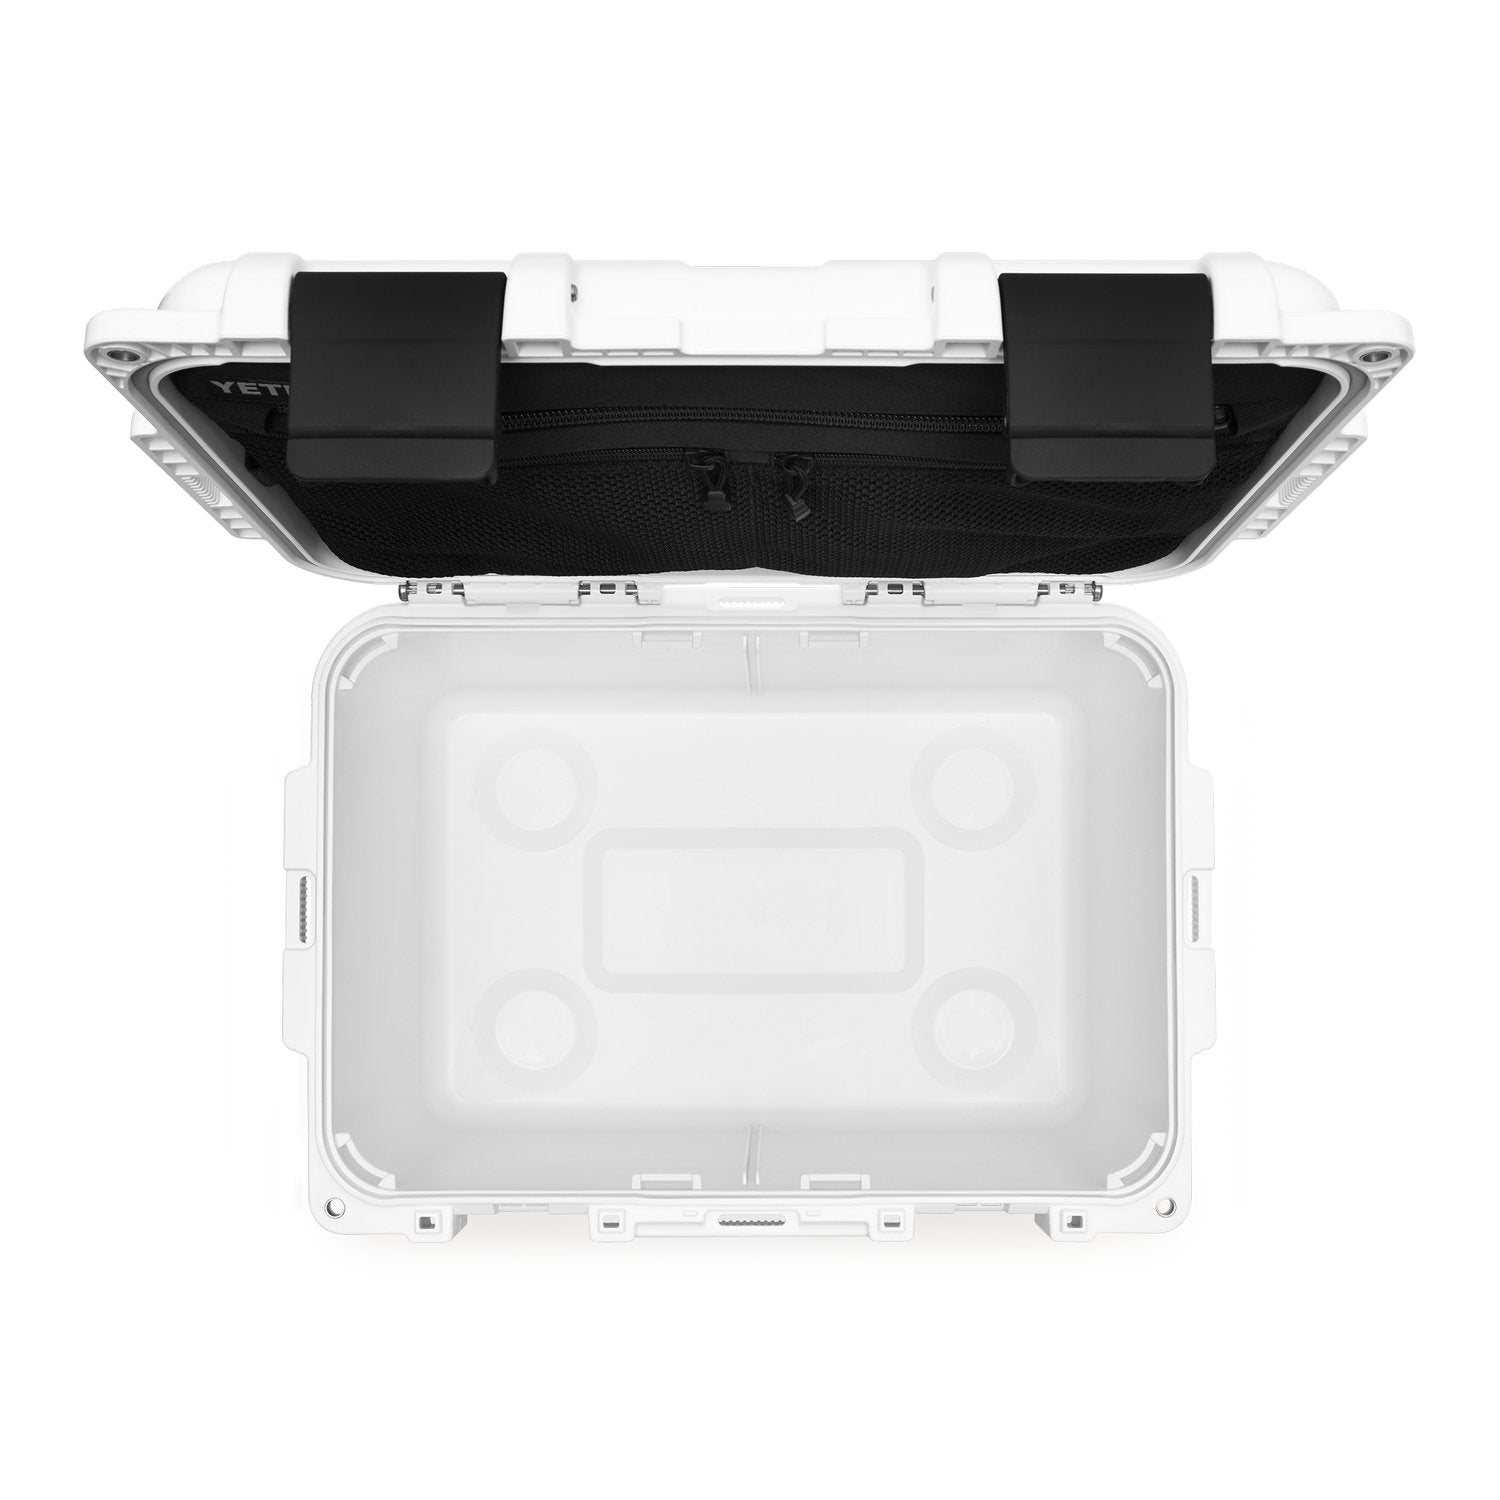 190901-Studio-Dealers-Images-Go-Box-Lid-Open-Top-Down-Caddy-Divider-Removed-White-2400x2400.jpg